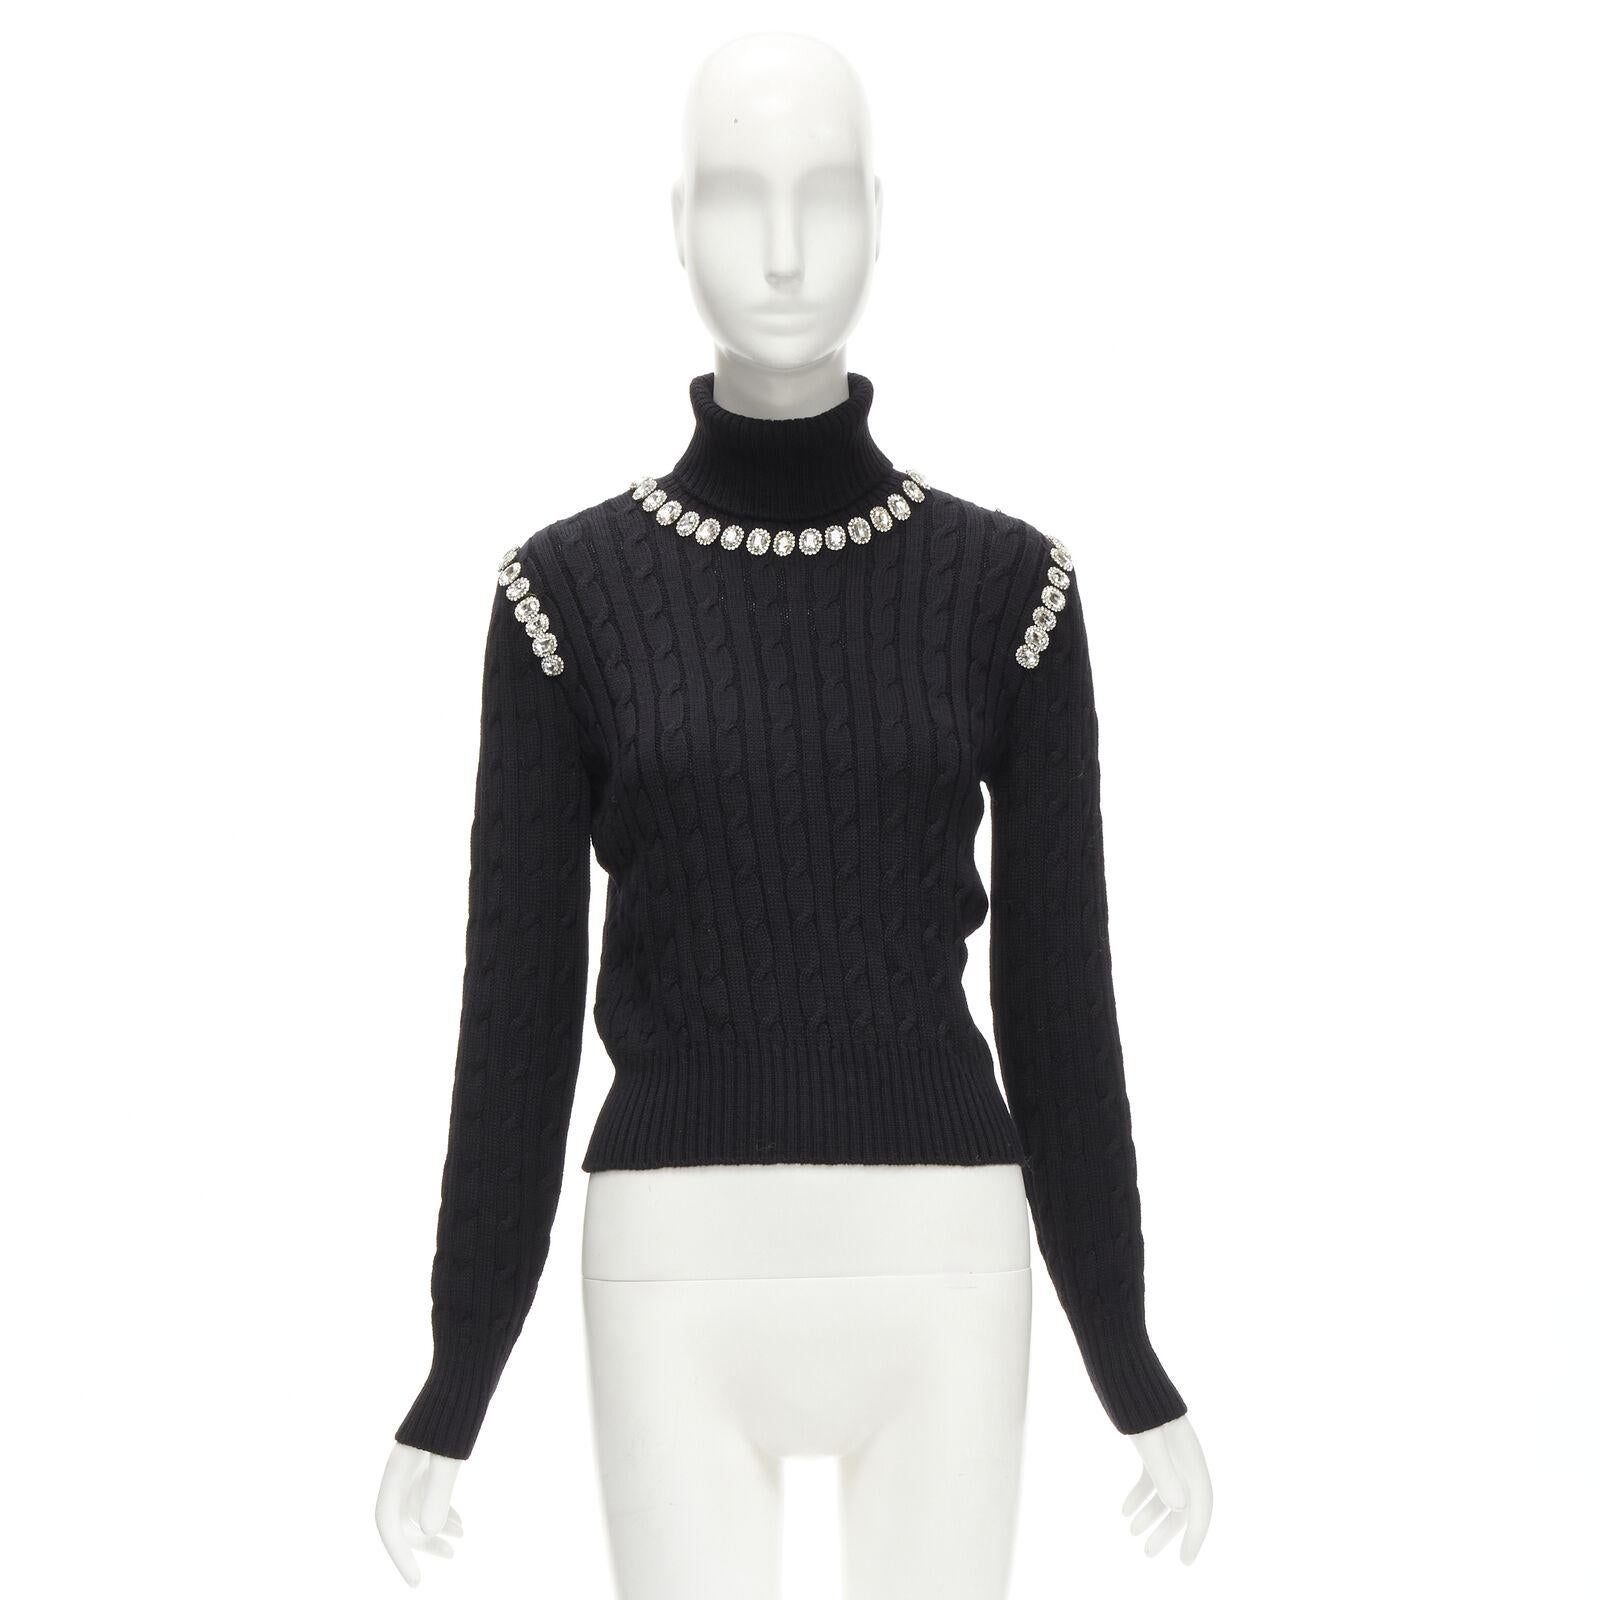 GIUSEPPE DI MORABITO black wool crystal embellished cable knit turtleneck IT38 For Sale 5